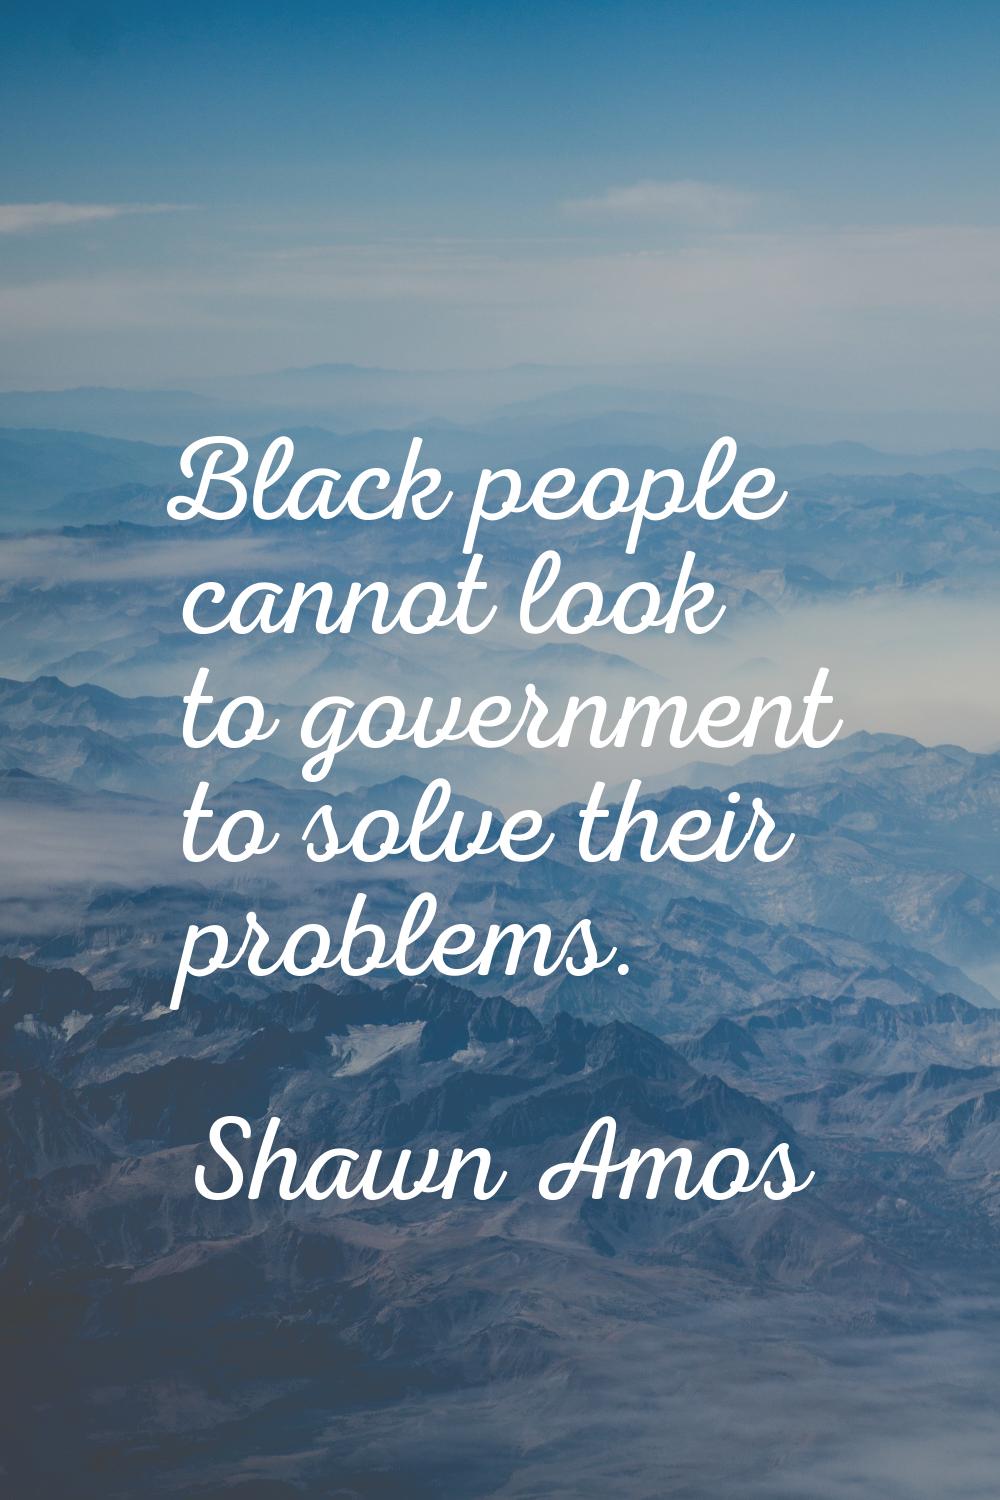 Black people cannot look to government to solve their problems.